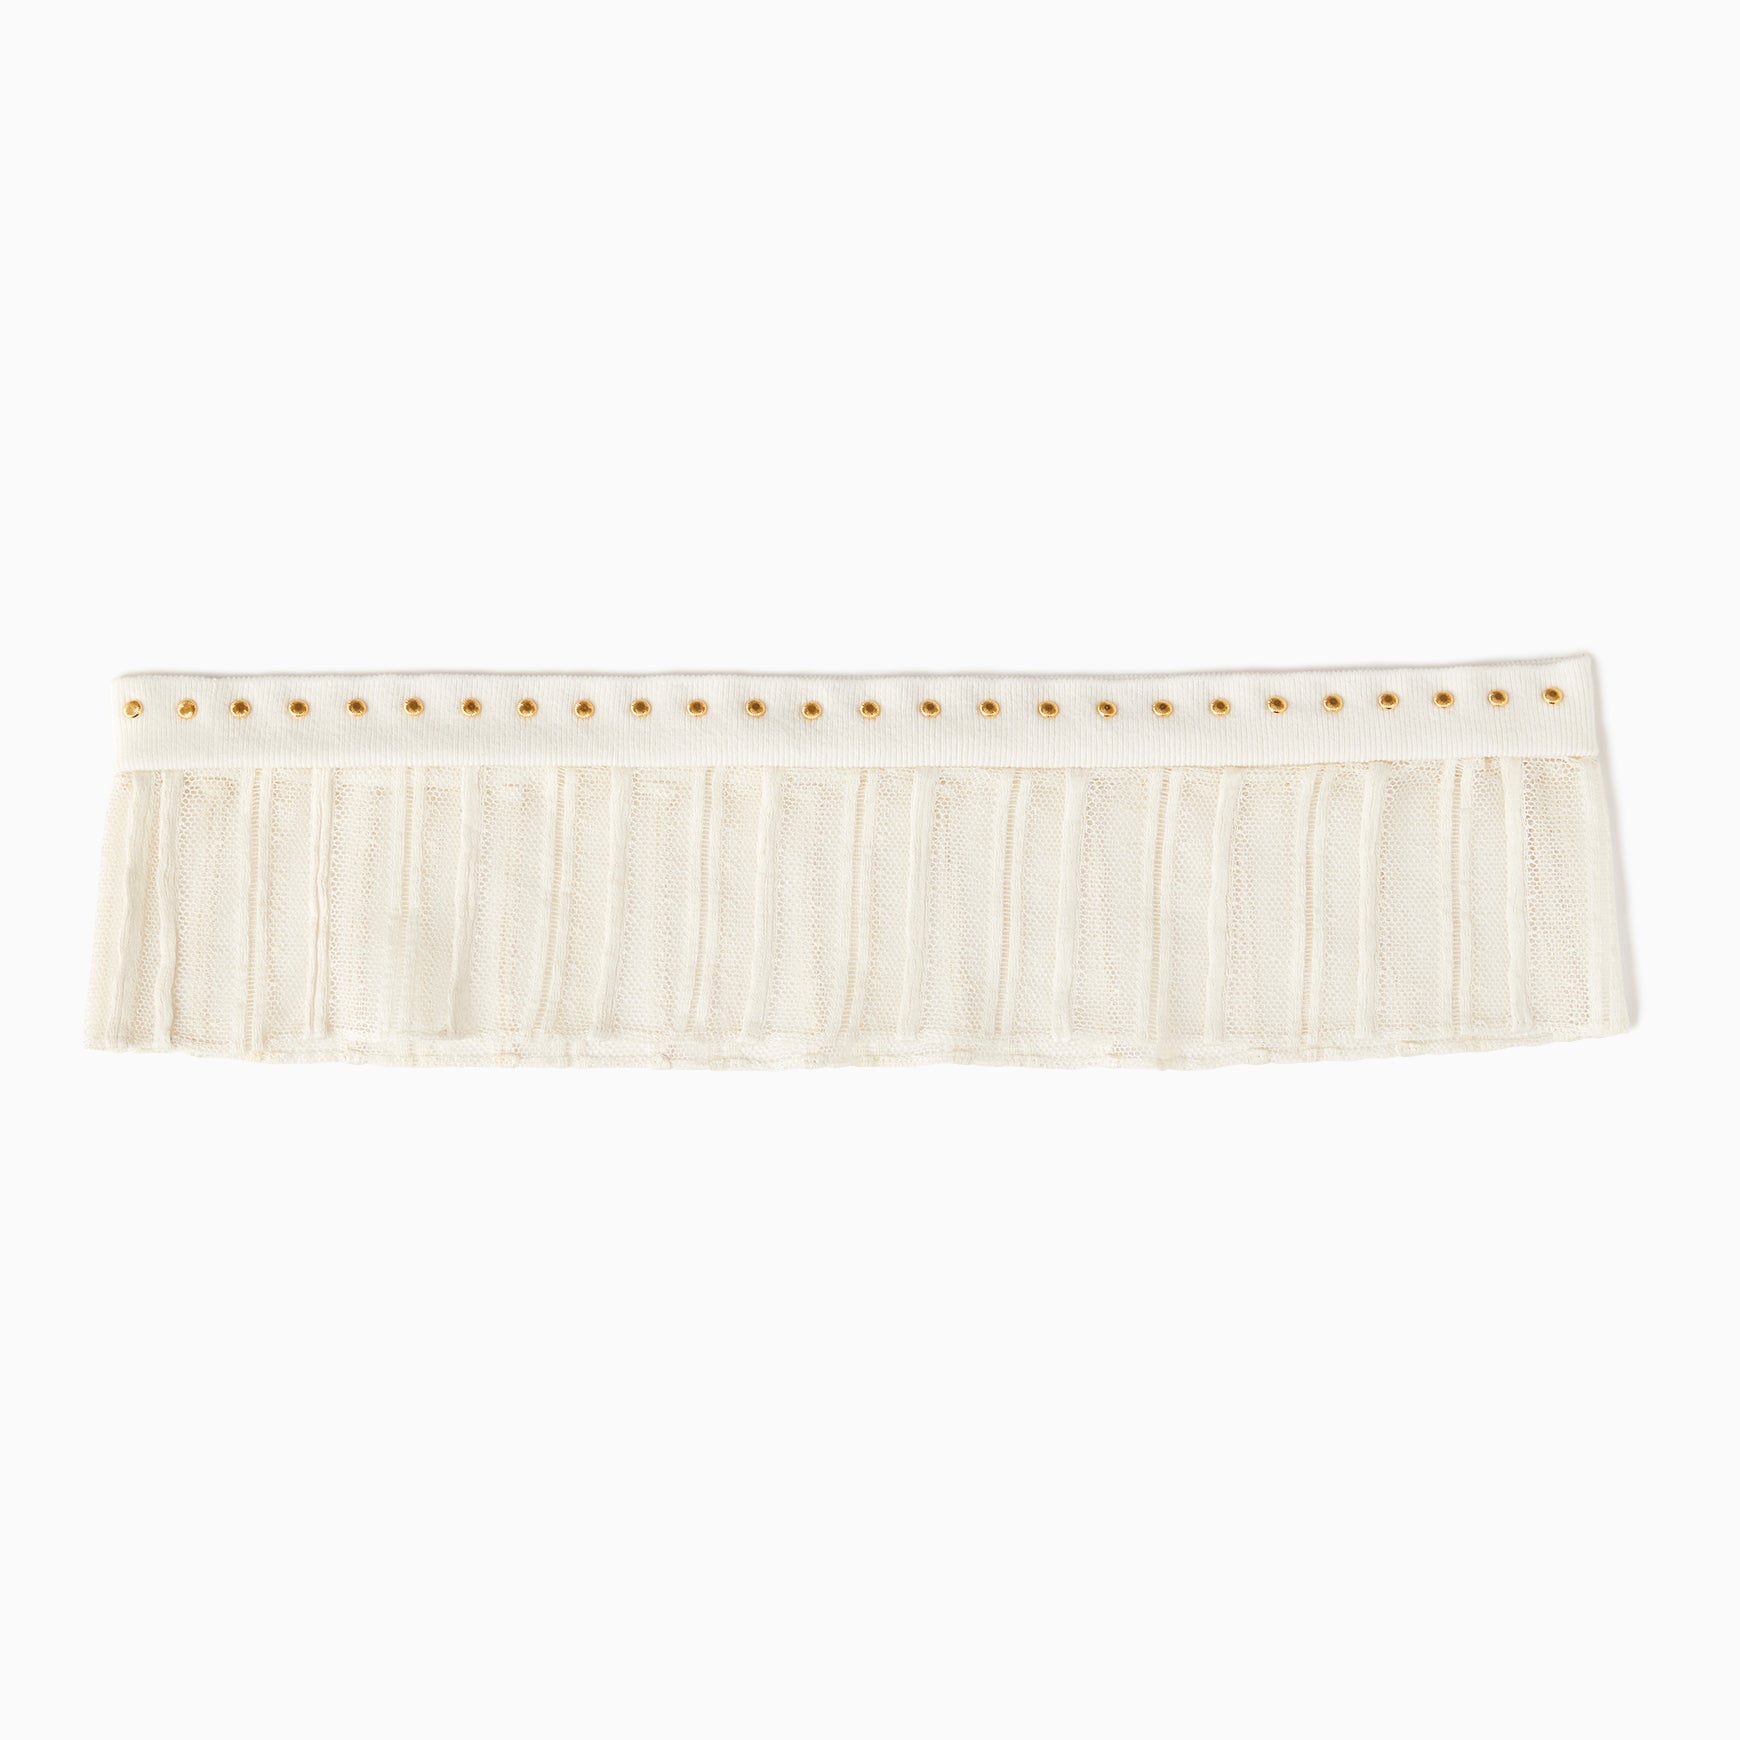 TYPE-1 Knit French Lace Waist Part (White Stripes)